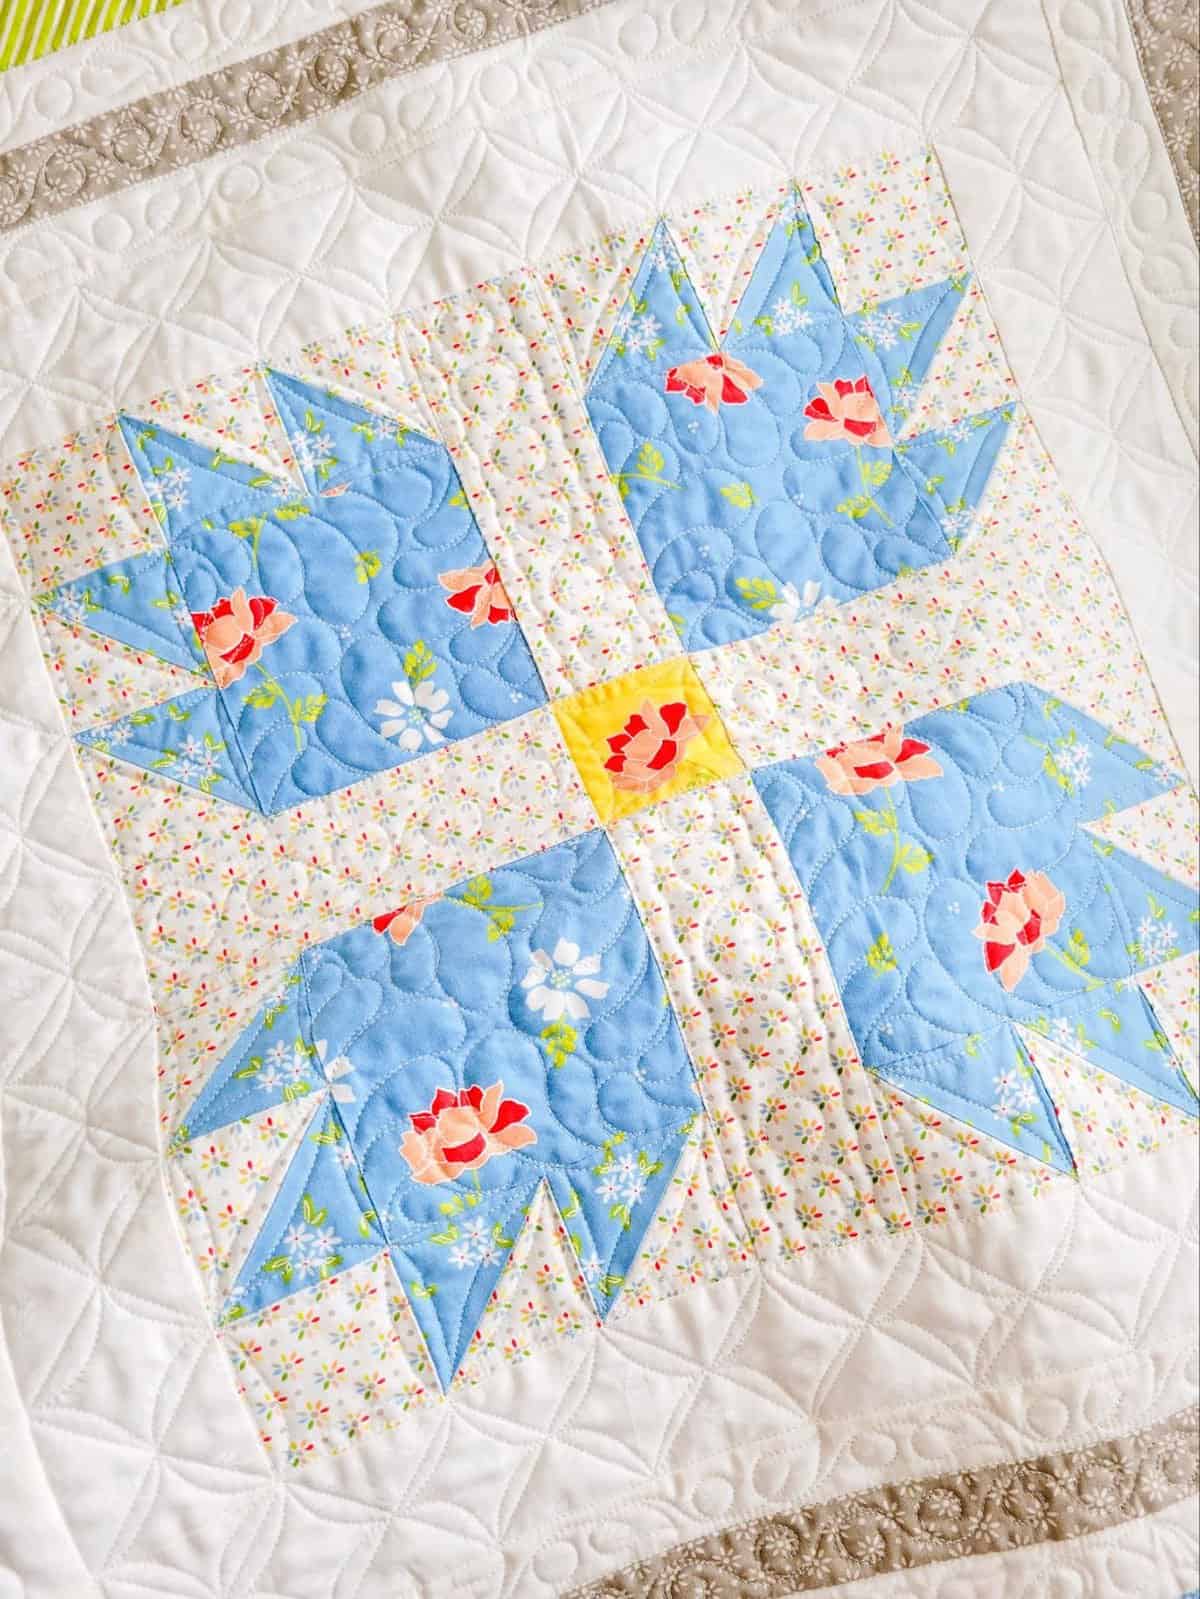 Home for the Holidays Sampler Block 7 featured by Top US Quilt Blog, A Quilting Life